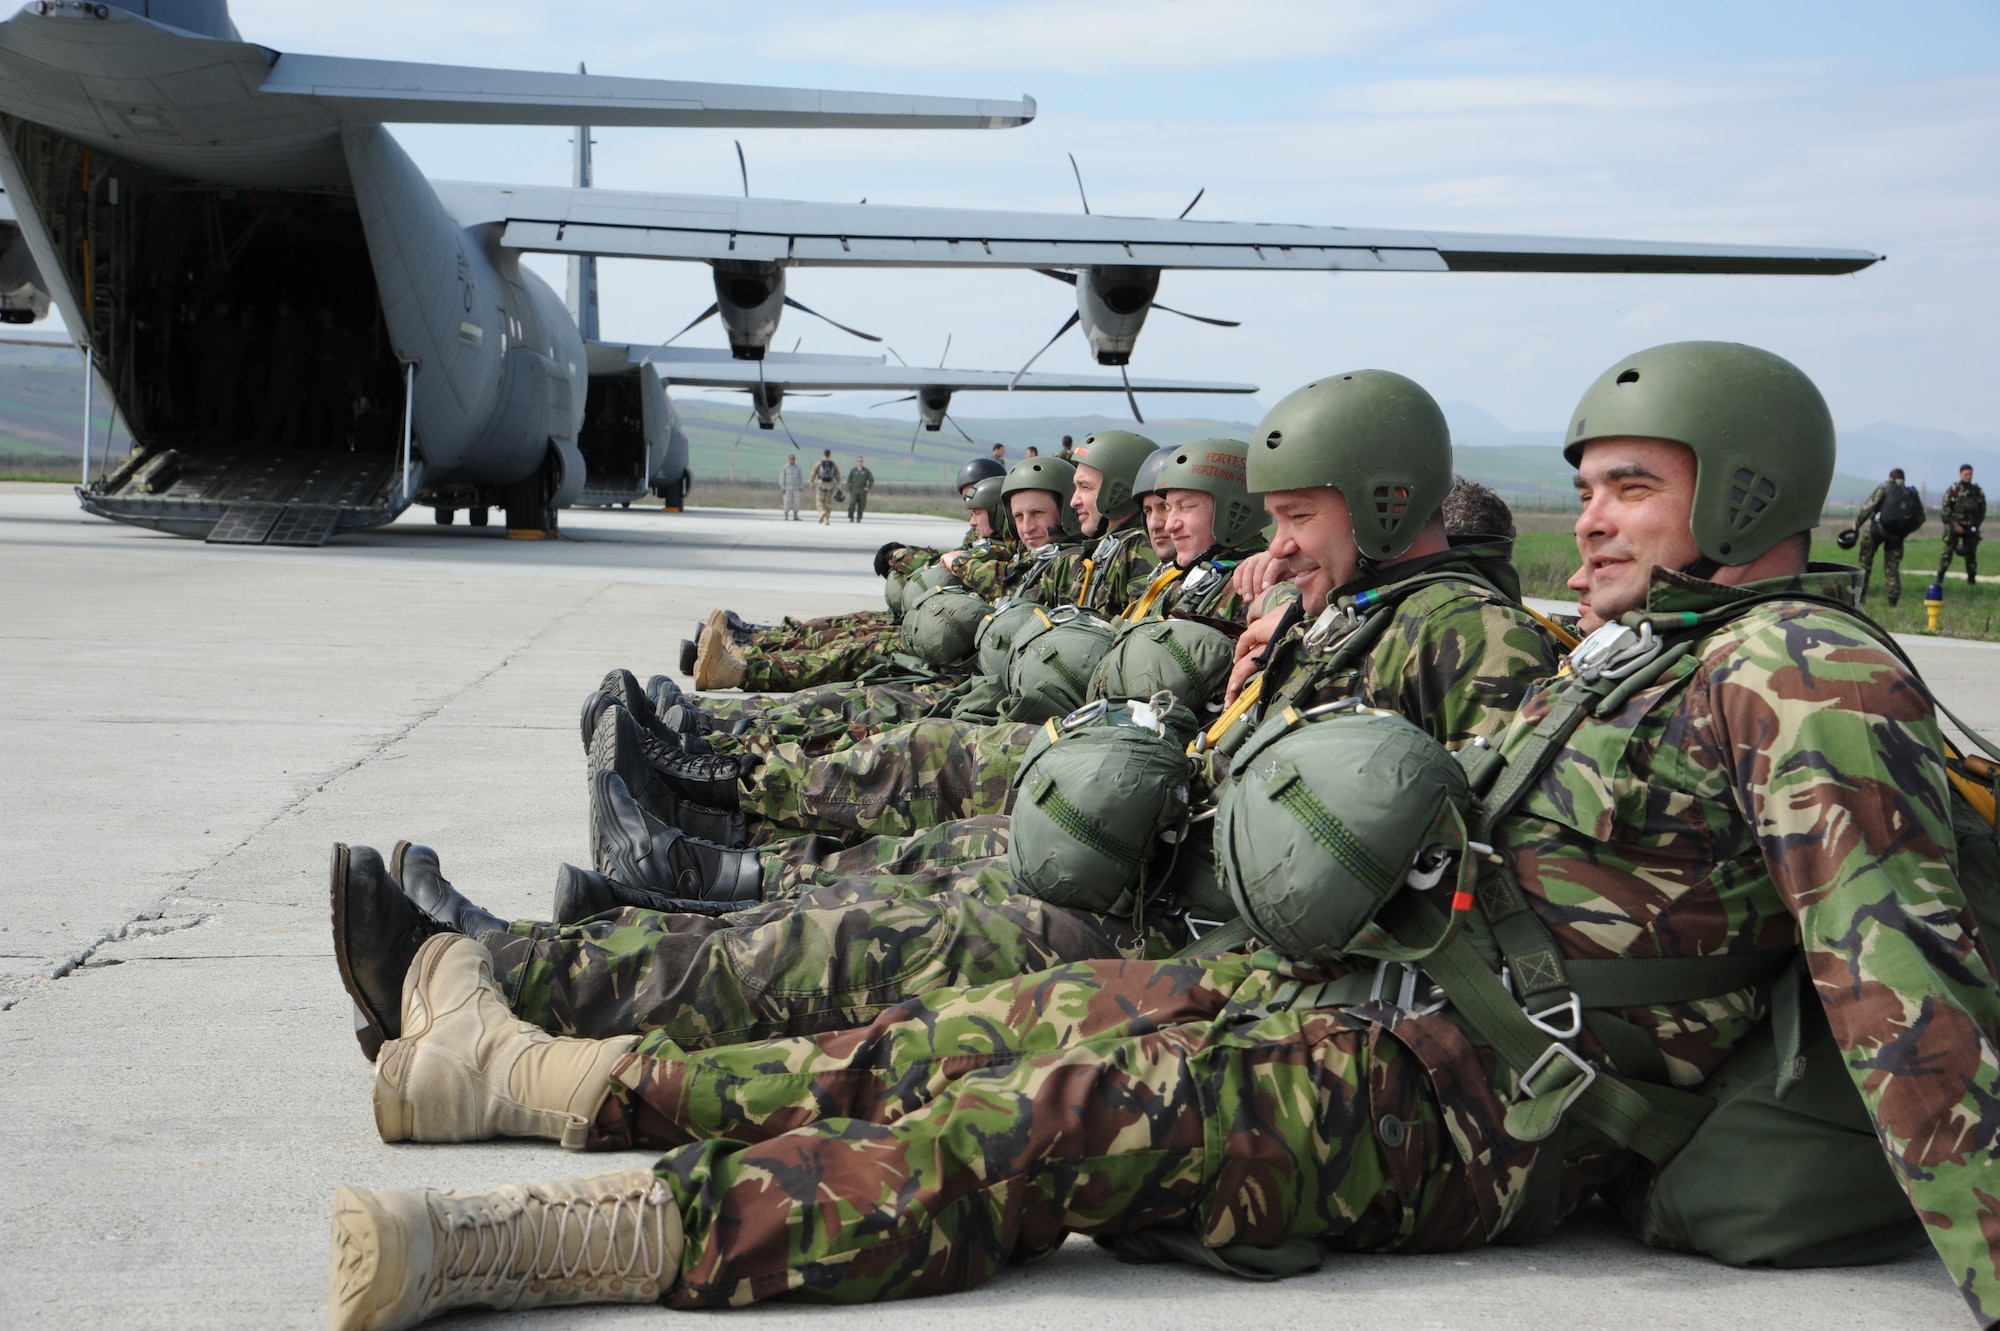 Romanian paratroops sit in formation before boarding a C-130J Super Hercules during Exercise Carpathian Spring, April 16, 2013, Bucharest, Romania. The exercise was designed for aircrew to receive upgrade training as well as building partnership capacity with Romanians. (U.S. Air Force photo/Airman 1st Class Hailey Haux)